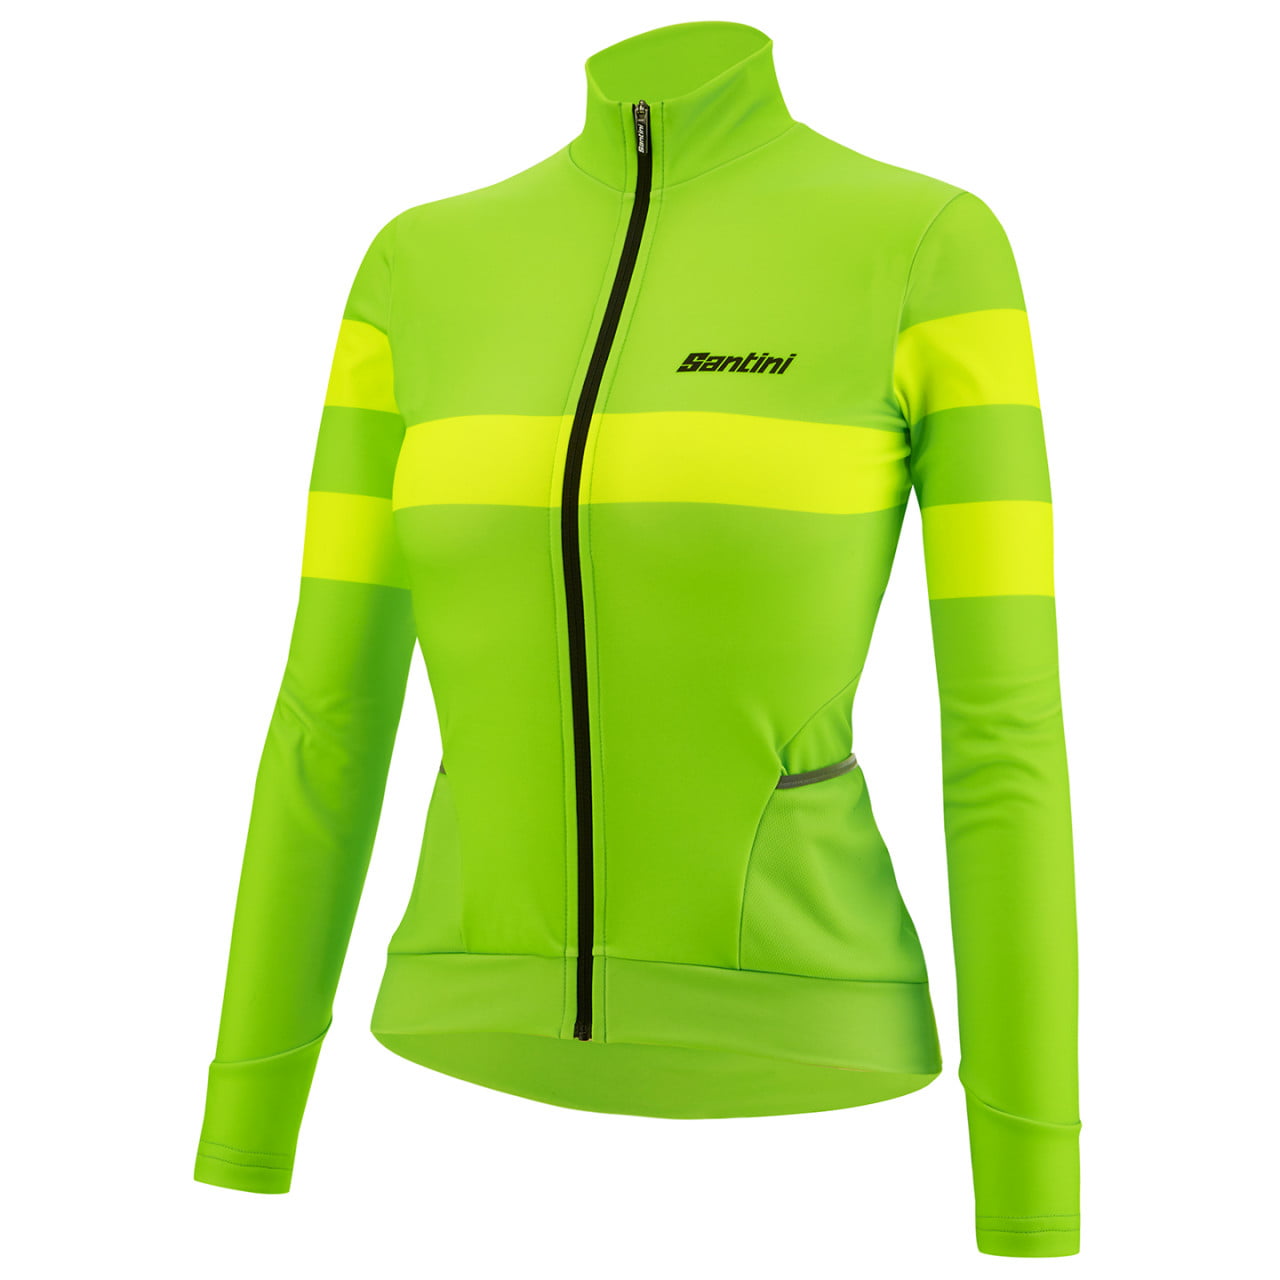 Coral Bengal Women's Long Sleeve Jersey